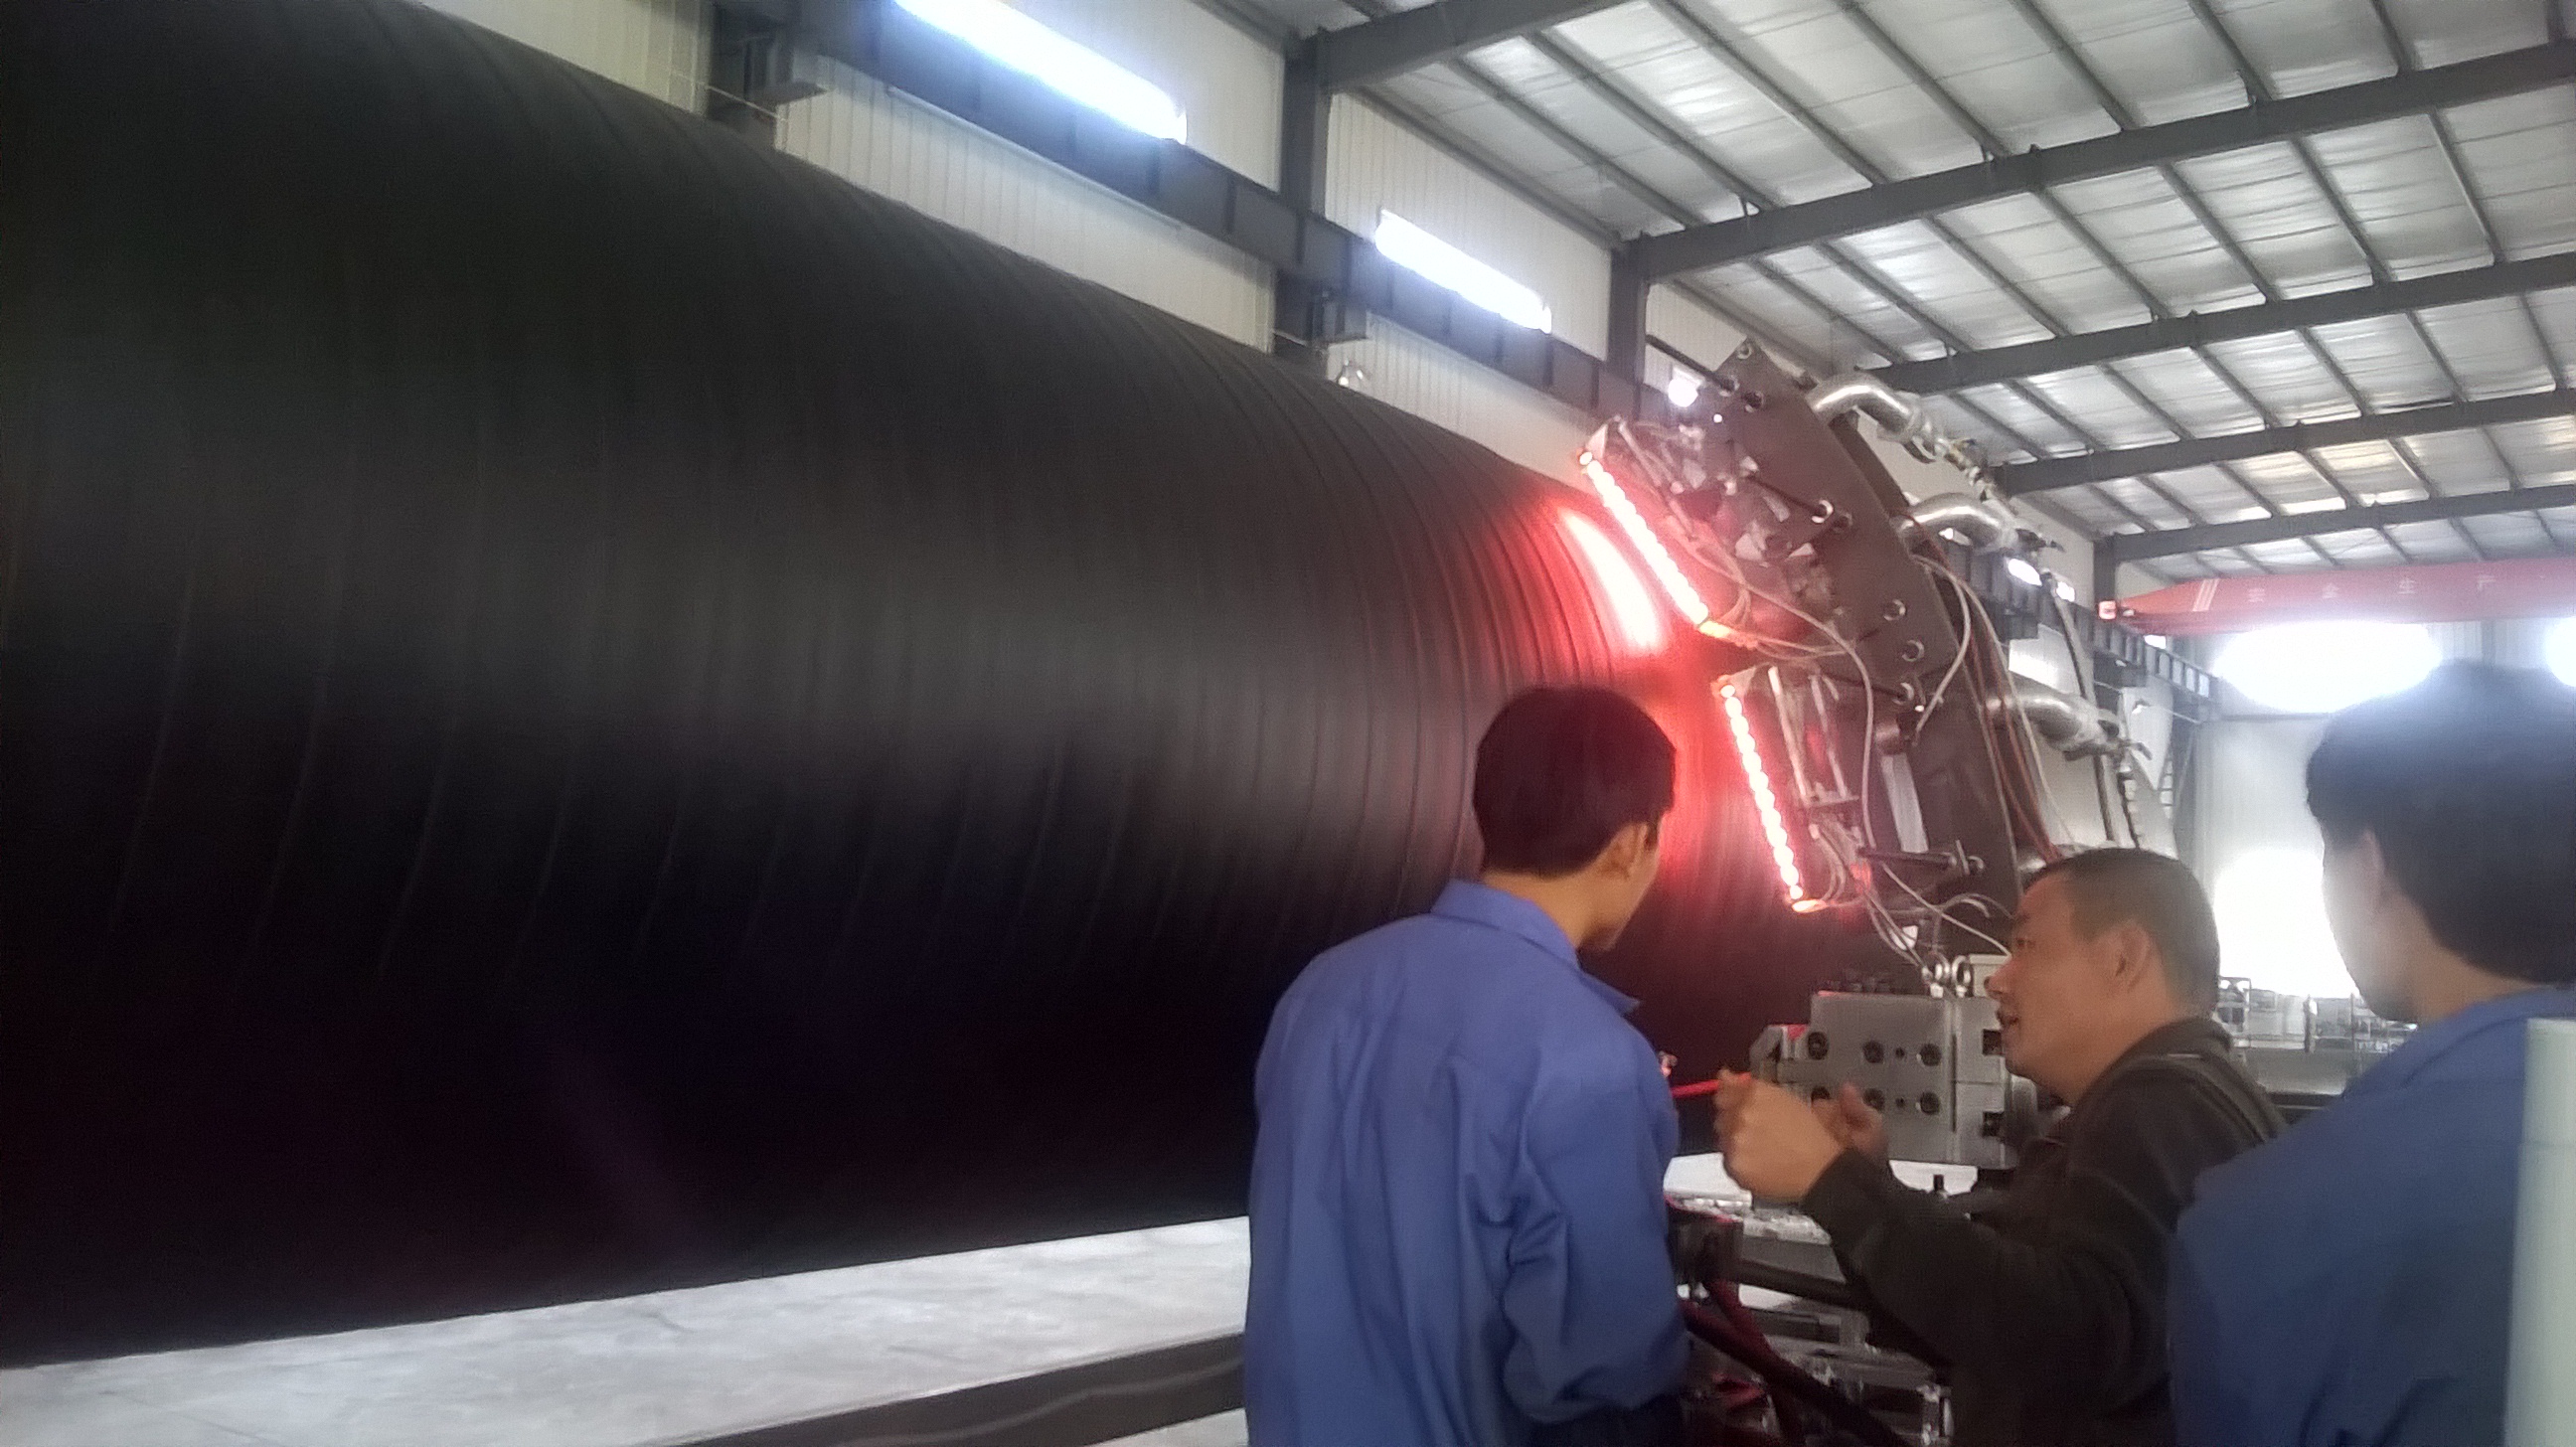 HDPE Spiral Tank for Chemical Storage